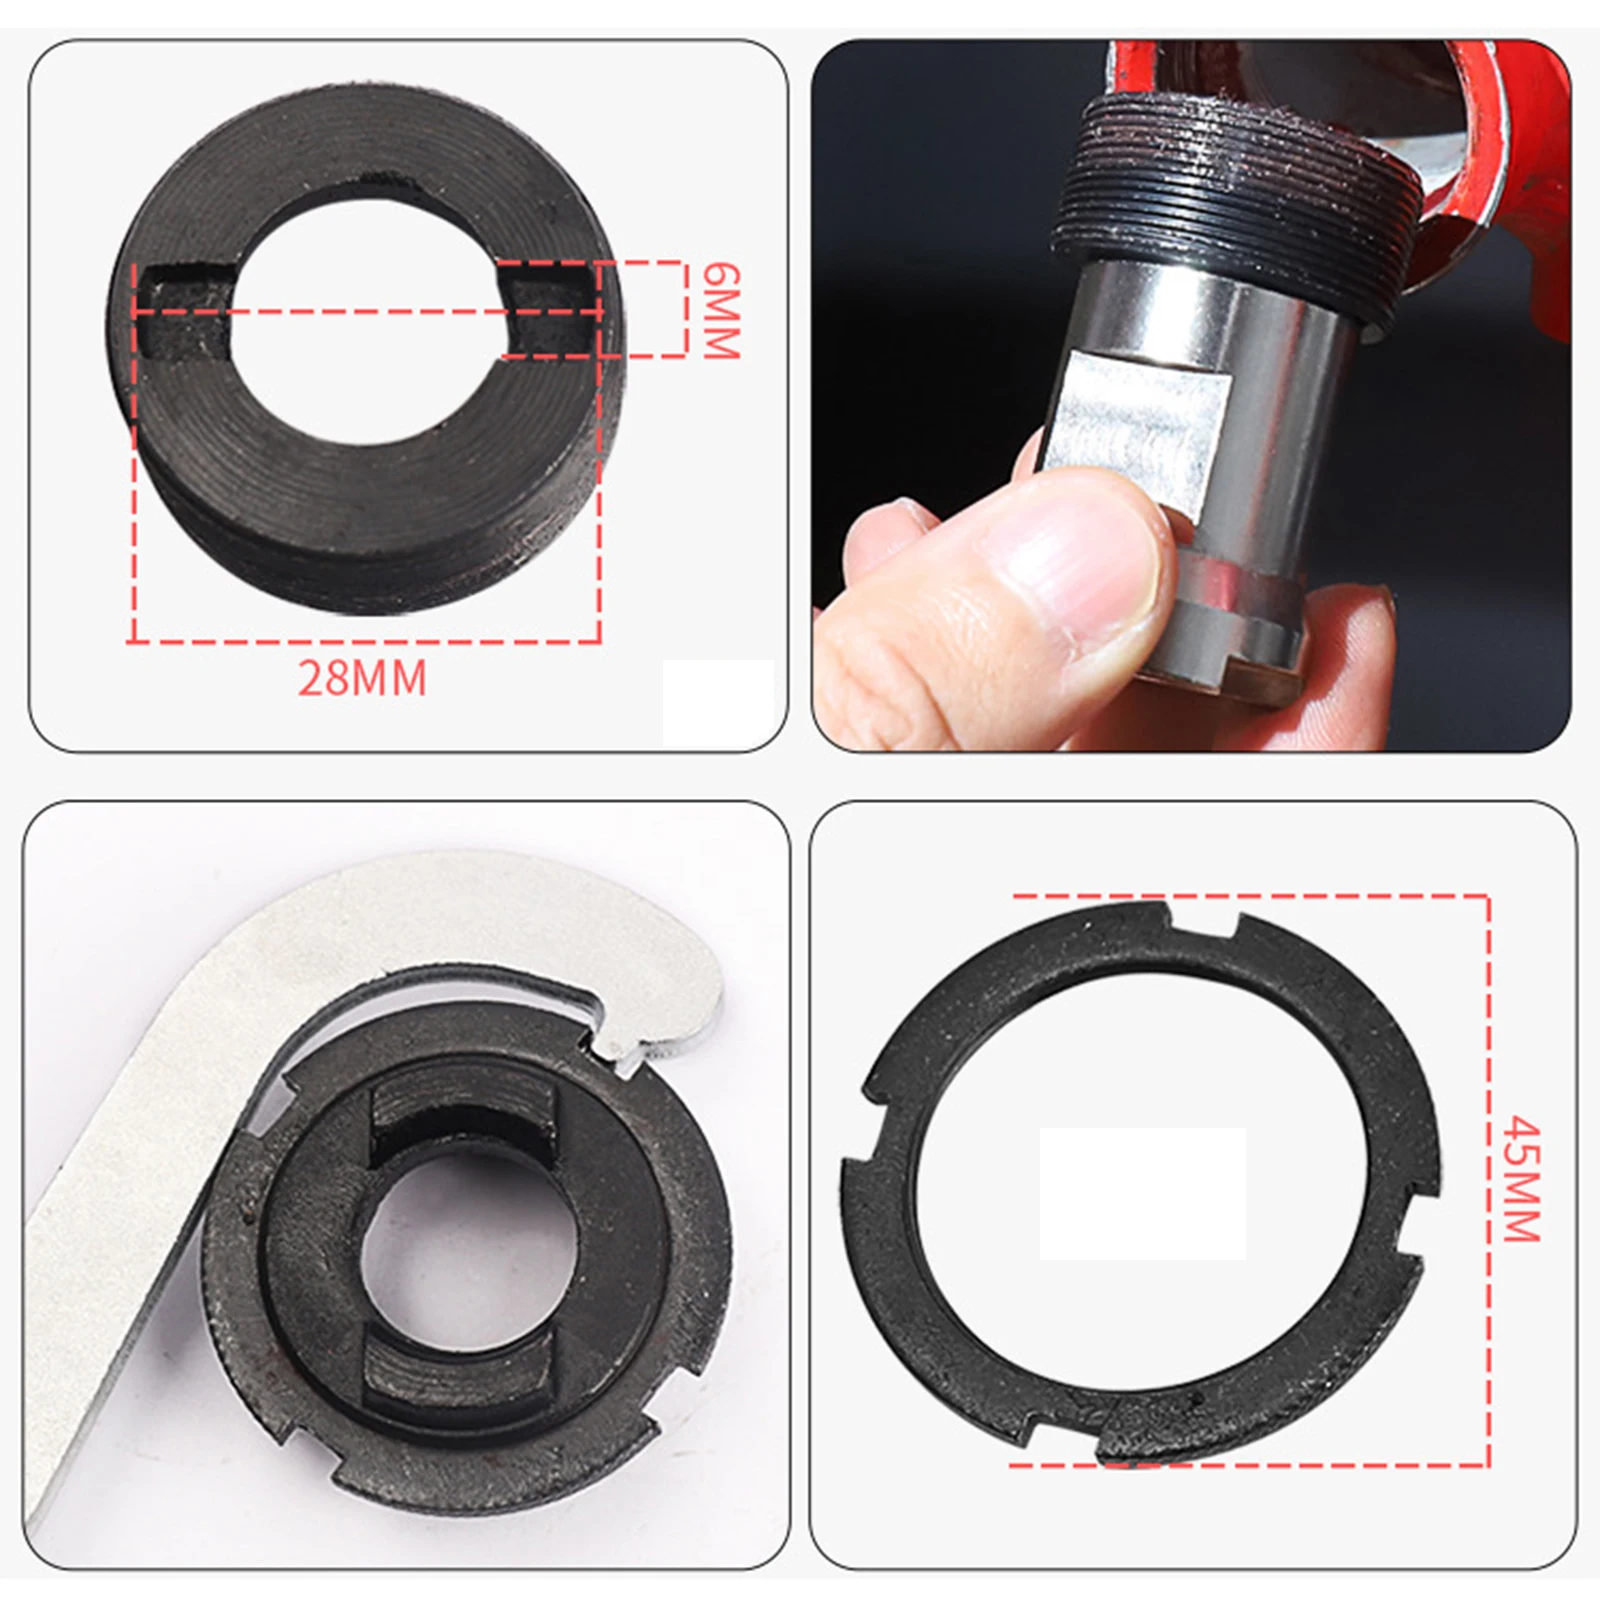 Bike Crank Extractor Arm Remover and Bottom Bracket Remover Lock Ring Repair Tool Steel Spanner/Wrench Tool Bicycle Repair Tool